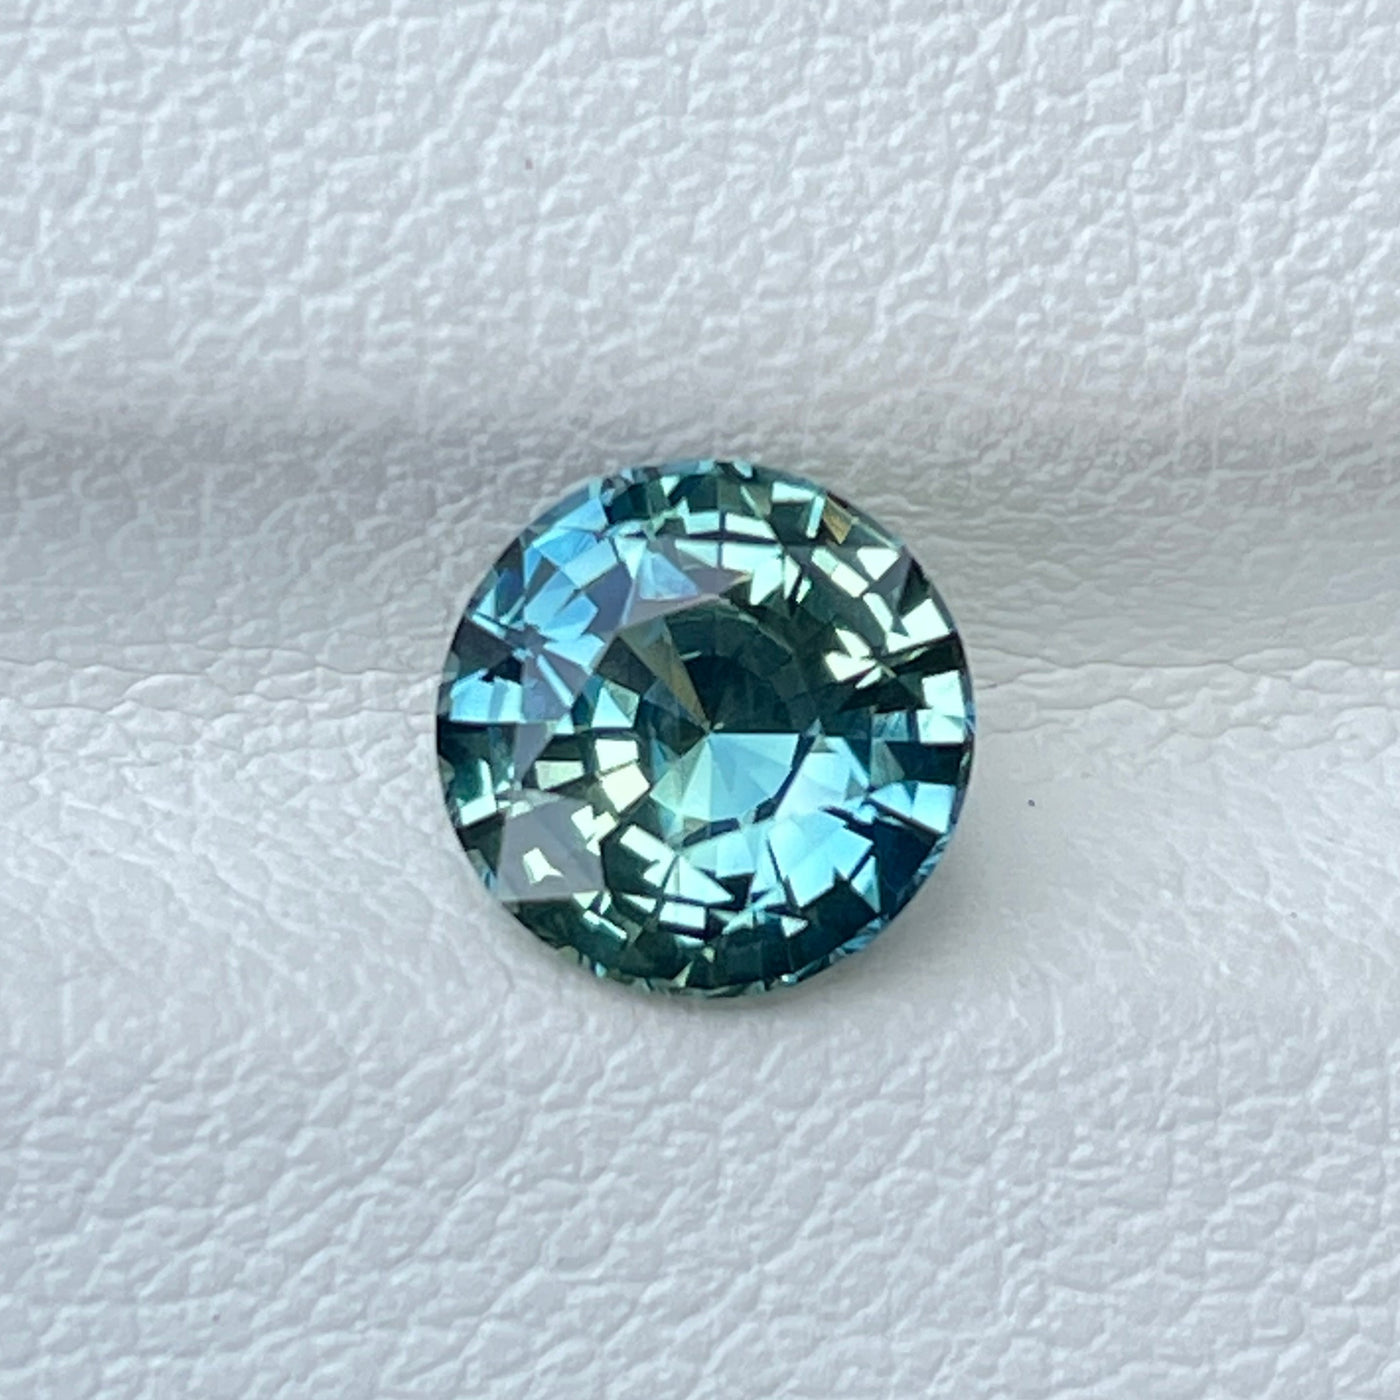 Bespoke fine unheated teal sapphire for bespoke engagement ring 